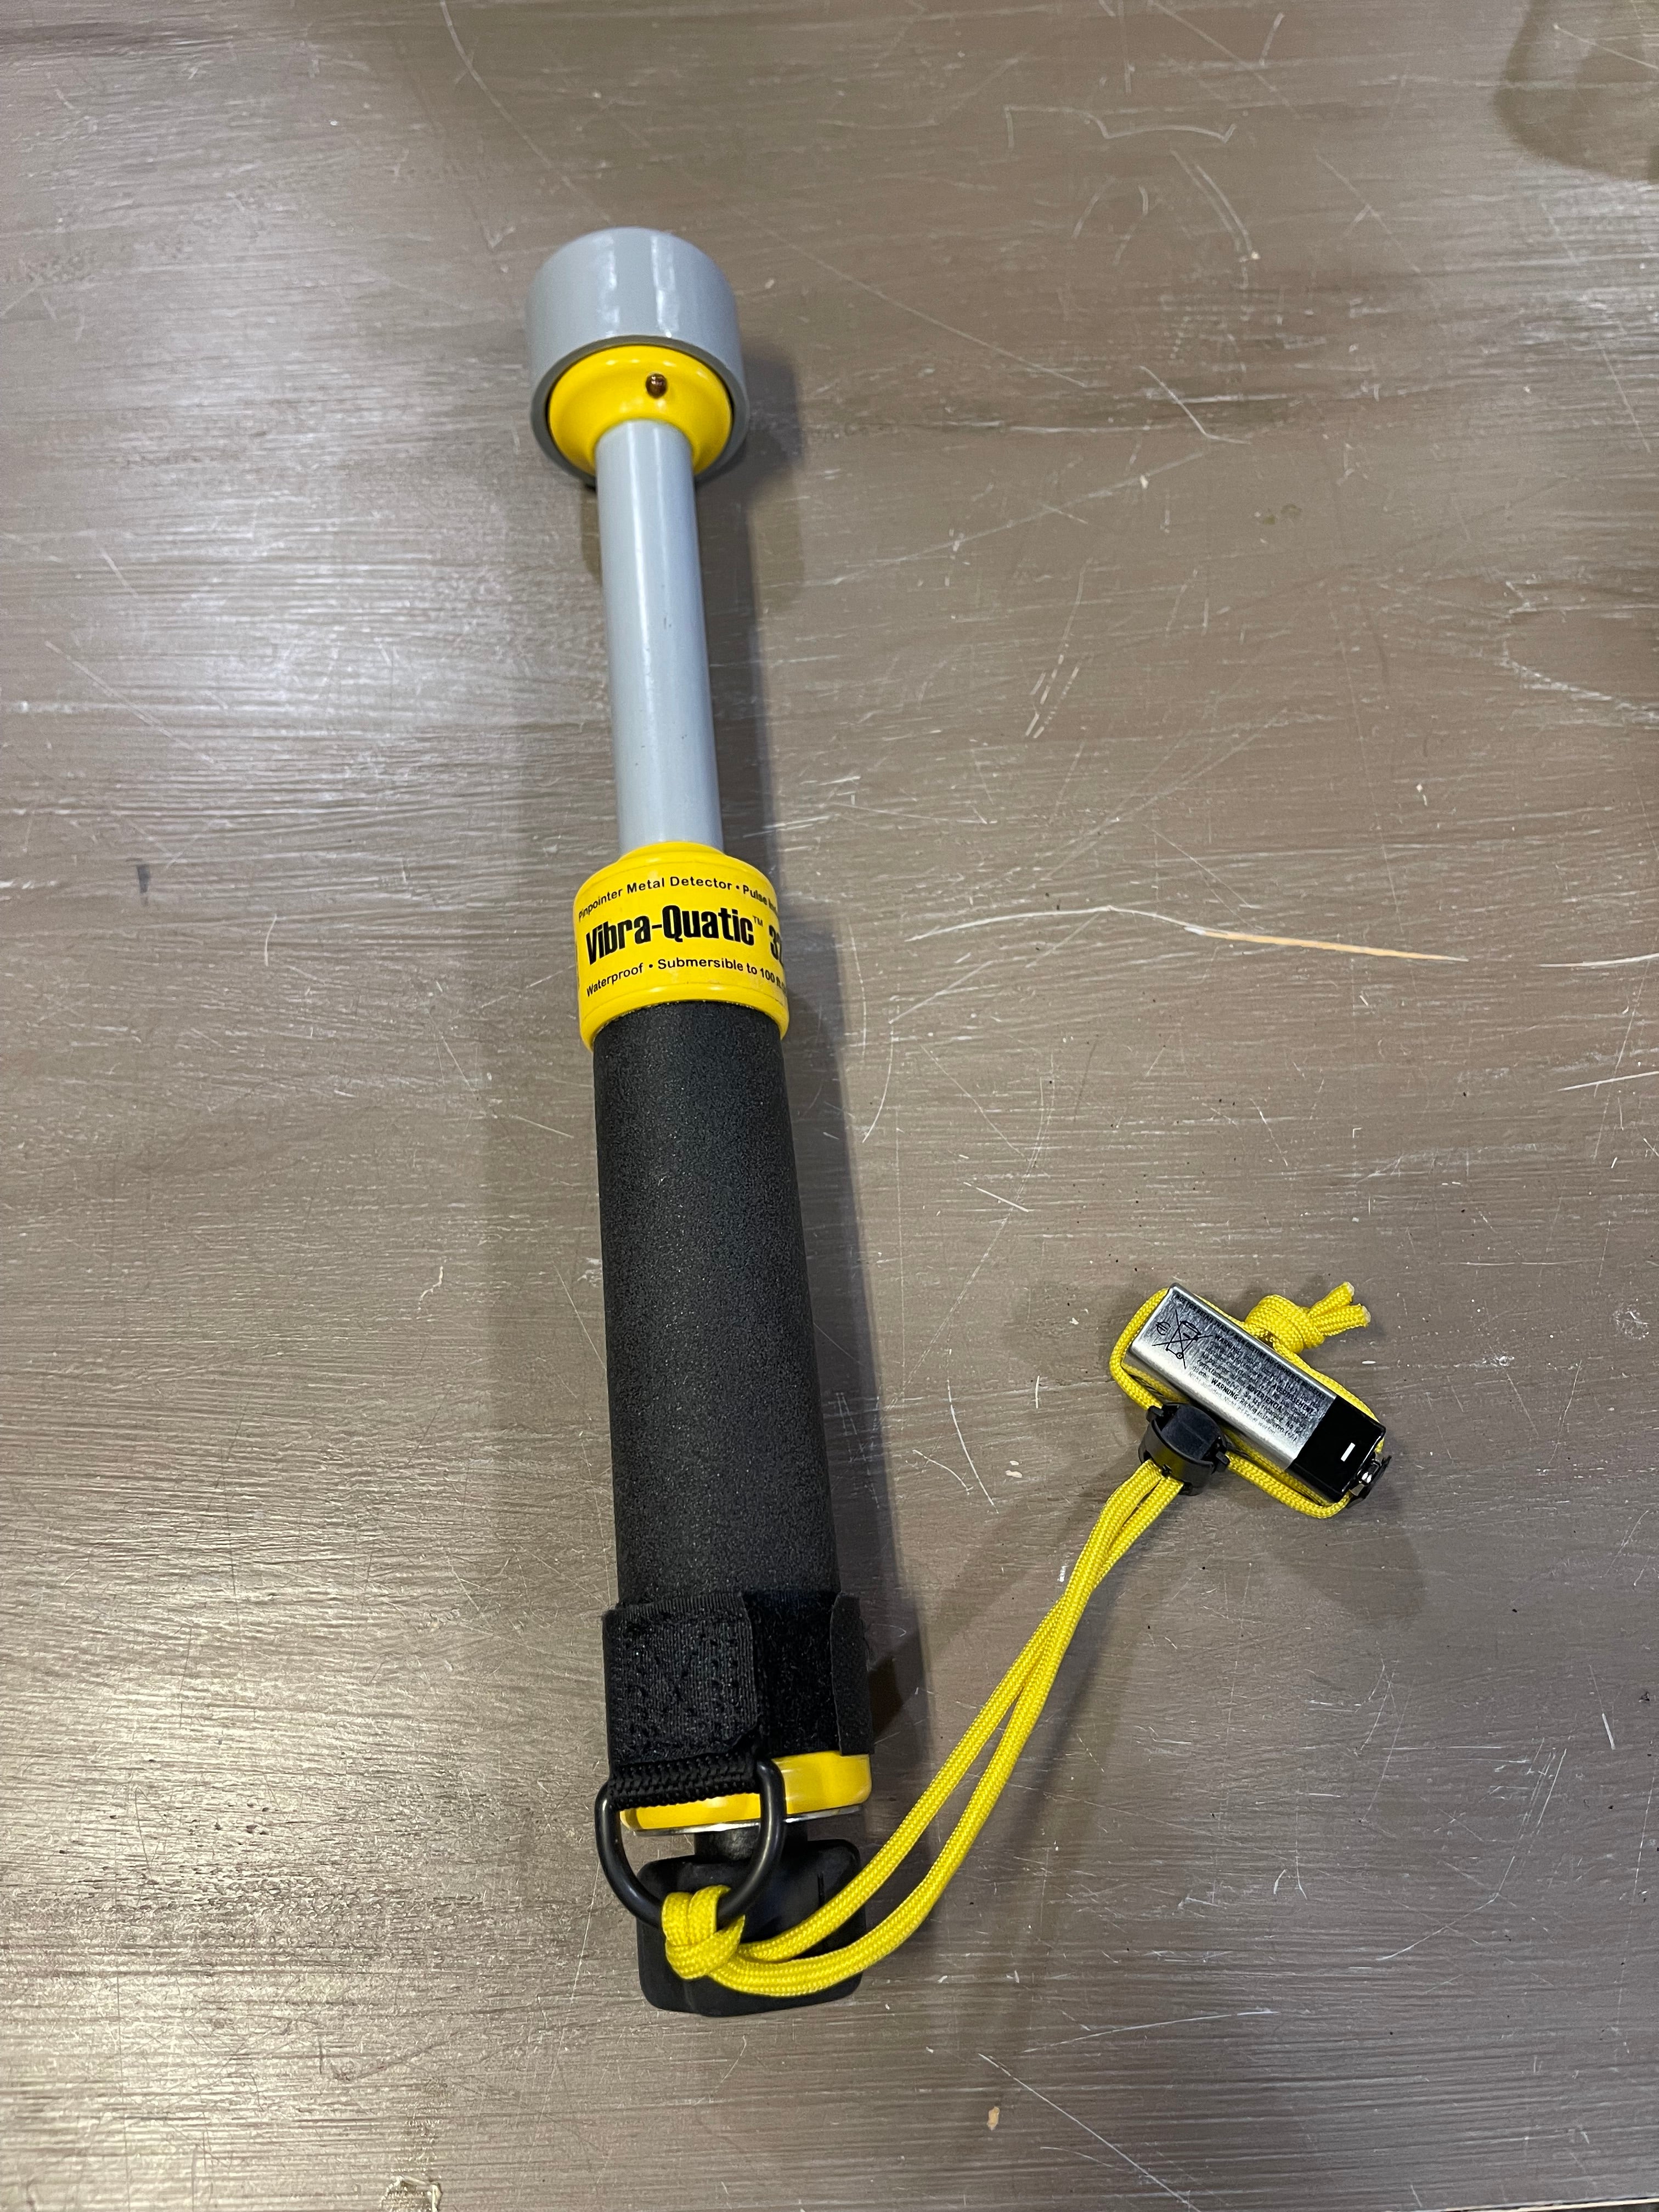 Used Once Treasure Products Vibra-Quatic 320 Pinpointer Detector - Submersible to 100 ft (30m)